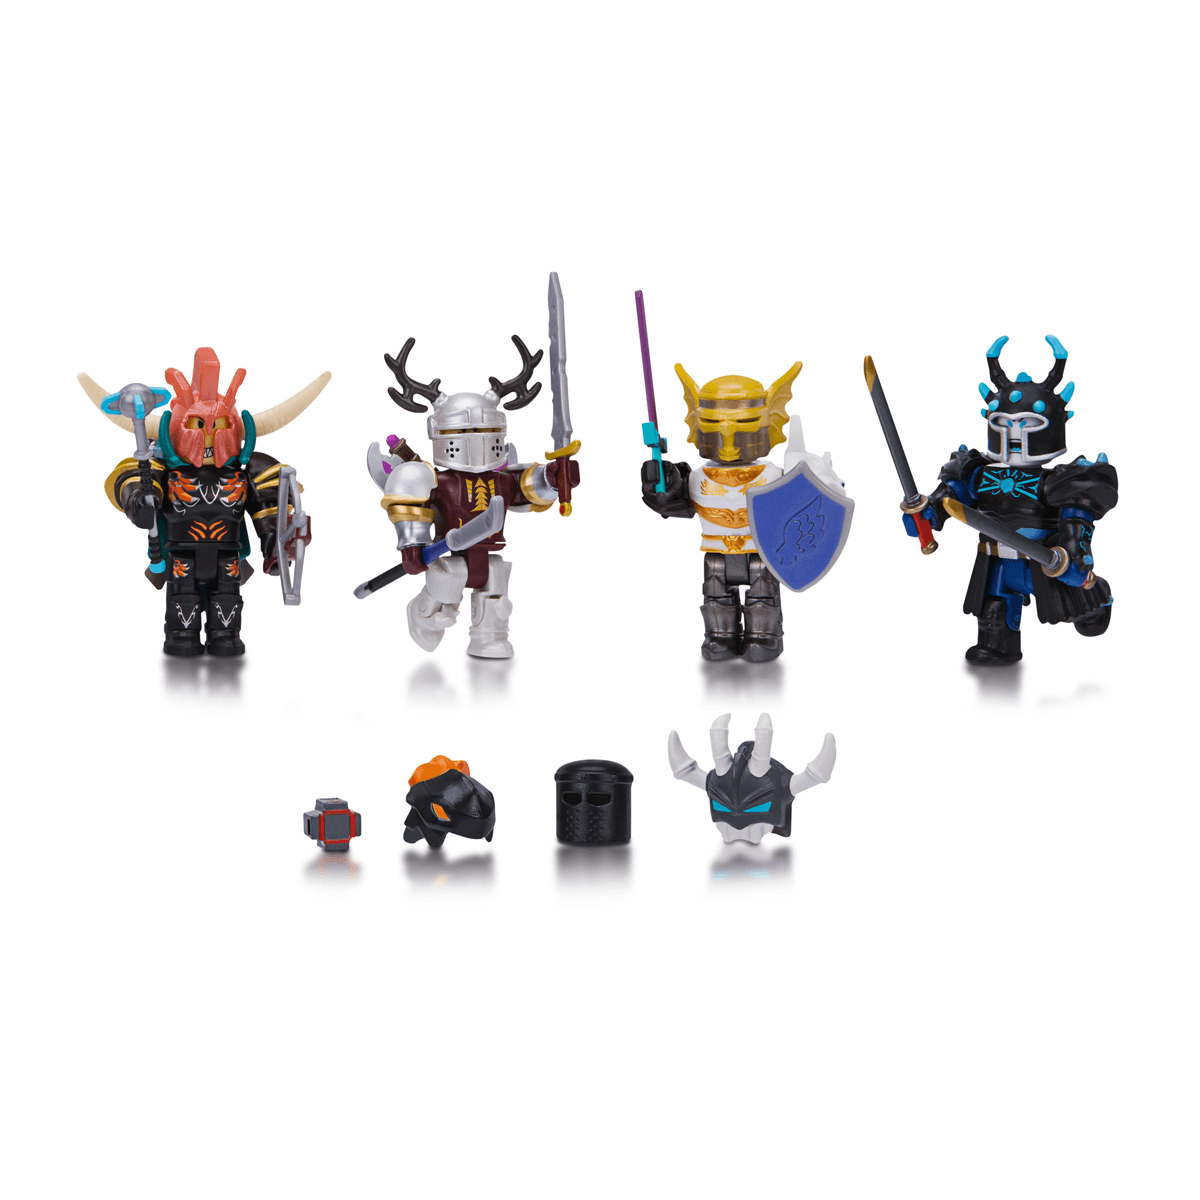 Roblox Days Of Knights Mix And Match Set - details about roblox celebrity collection exclusive figure 12 pack set